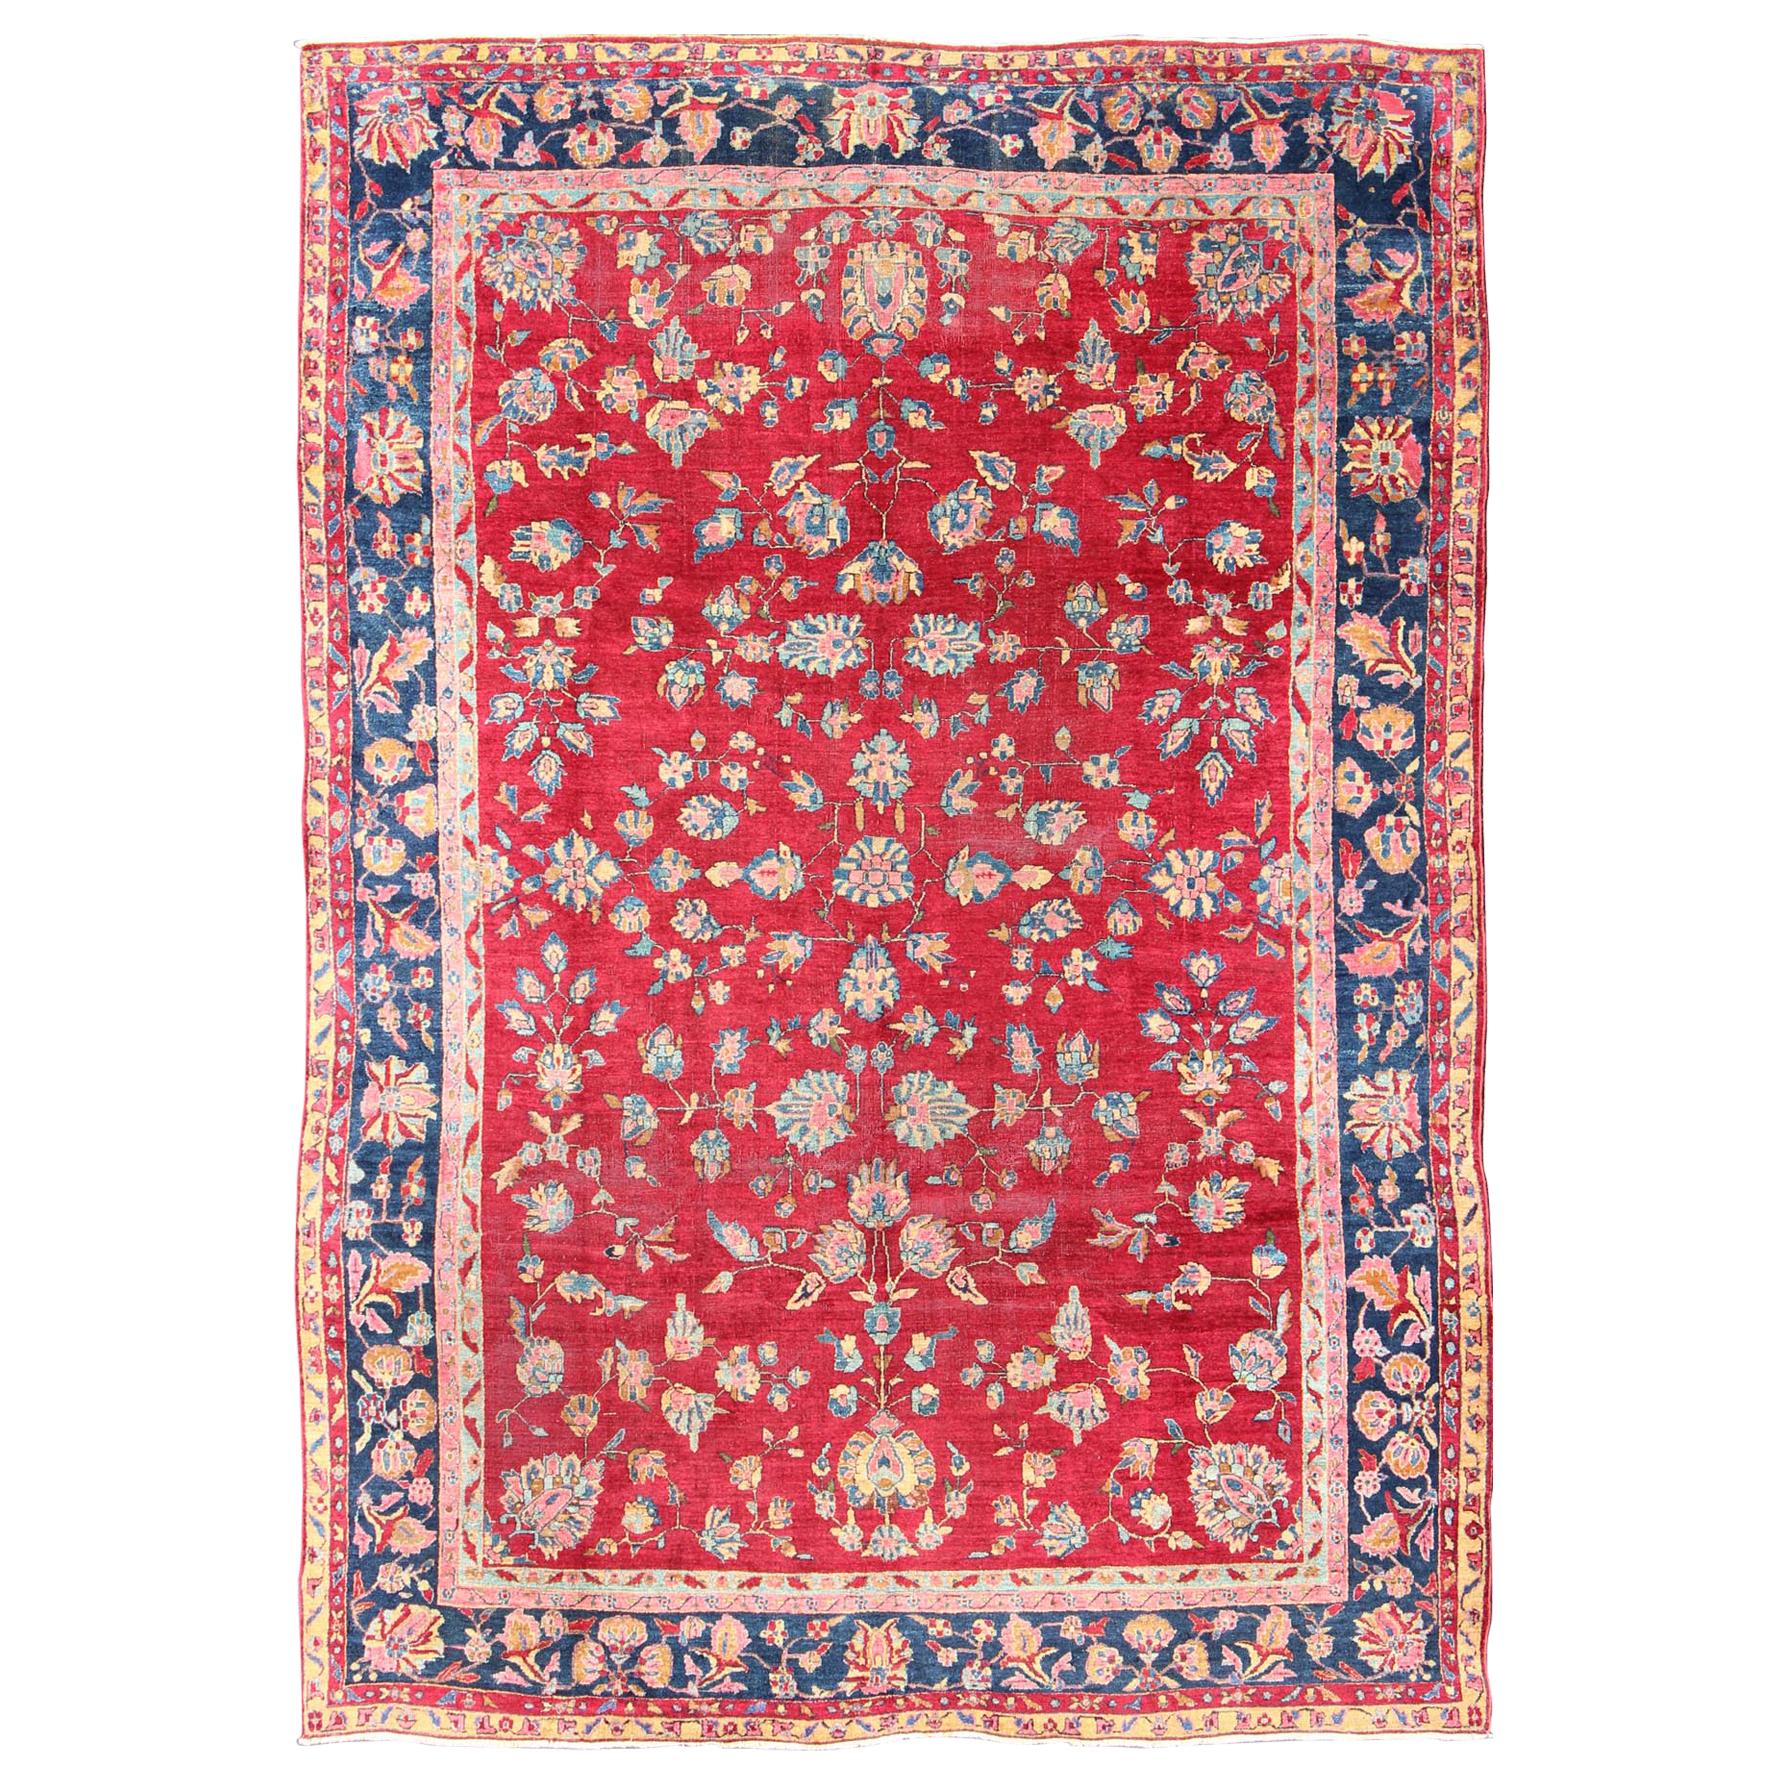 All-Over Floral Design Antique Indian Amritsar Rug in Red and Blue Tones For Sale